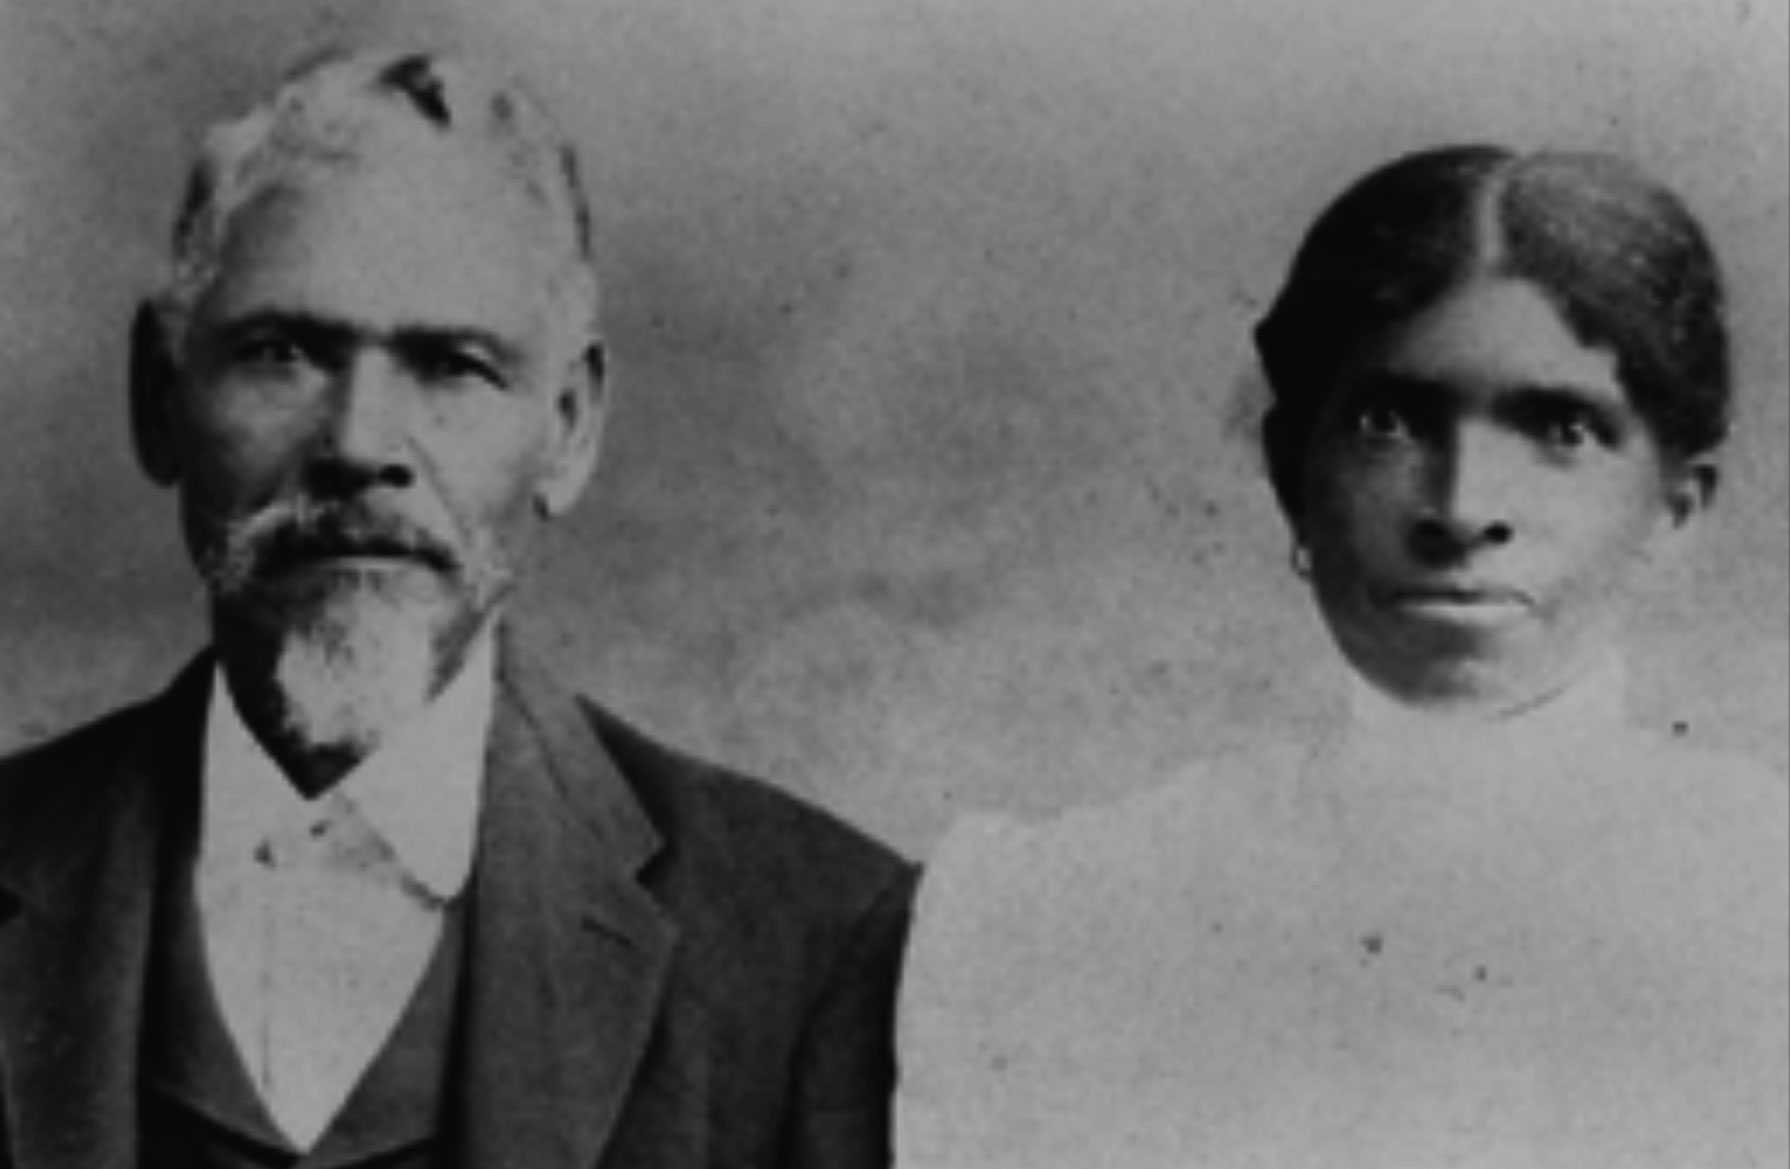 A blurry black and white photograph of Dick and Eliza Barnett. He is wearing a suit and she is wearing a white dress.